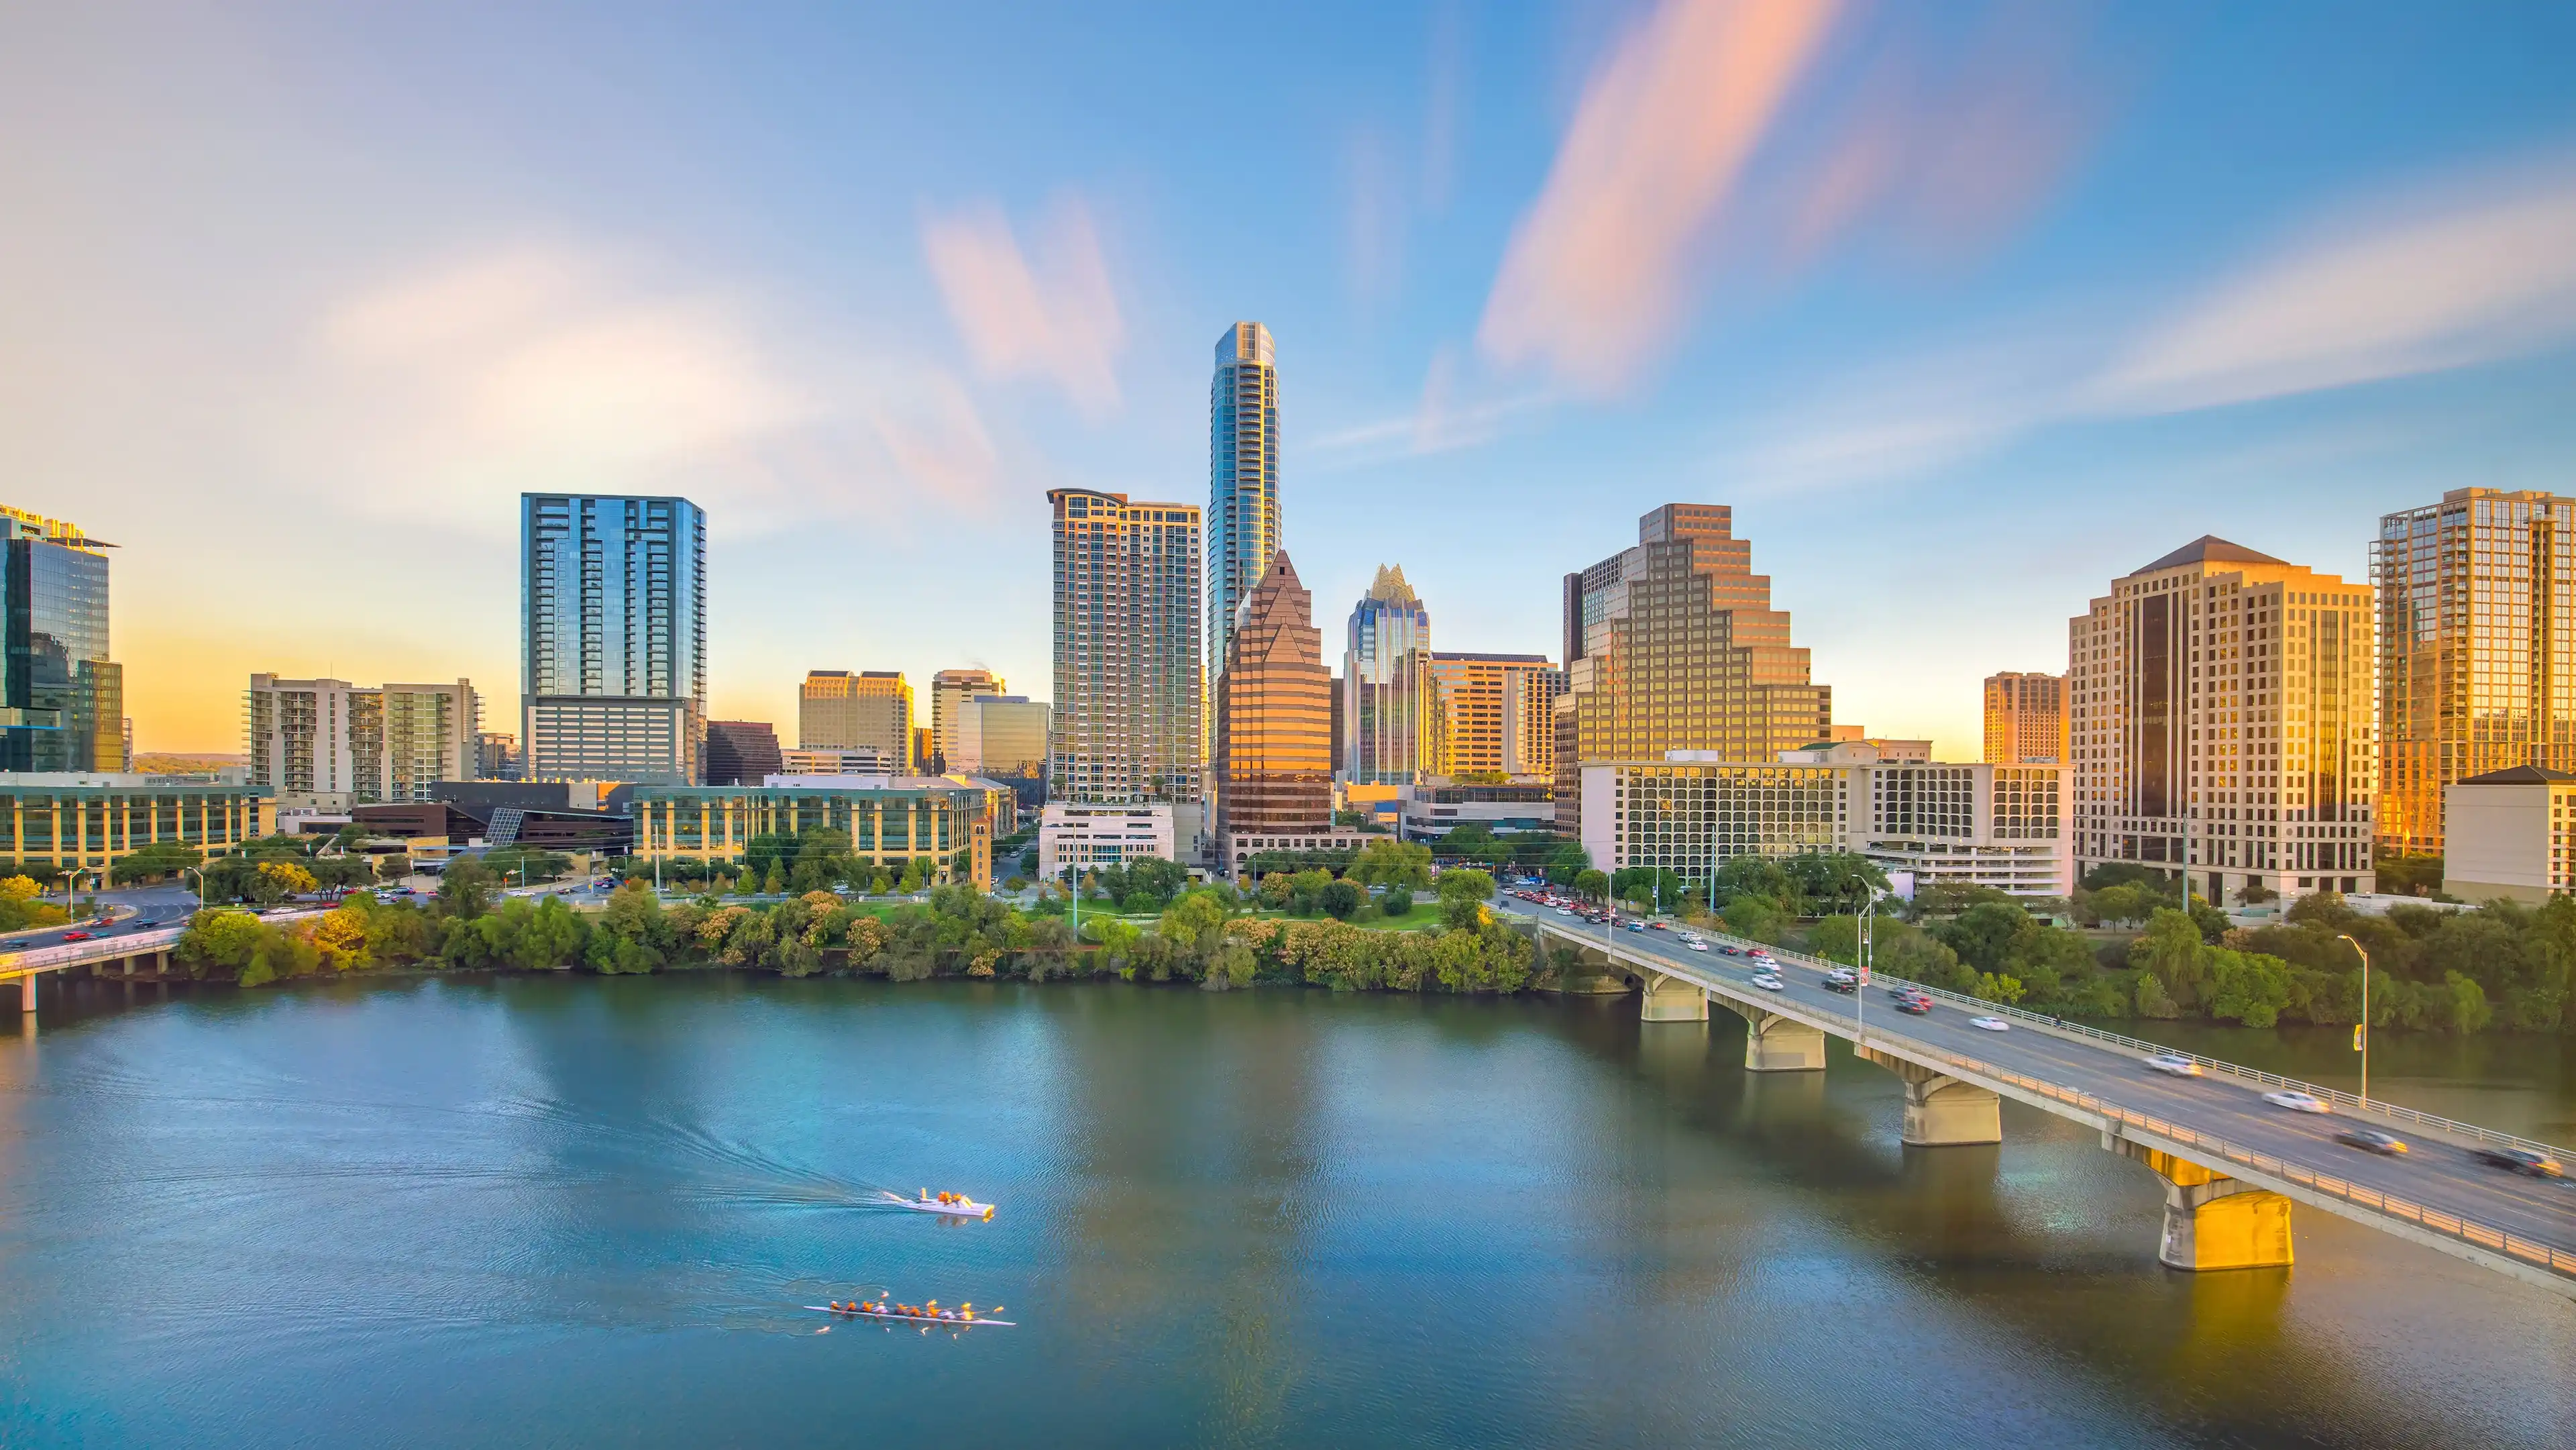 Downtown Skyline of Austin, Texas in USA from top view at sunset